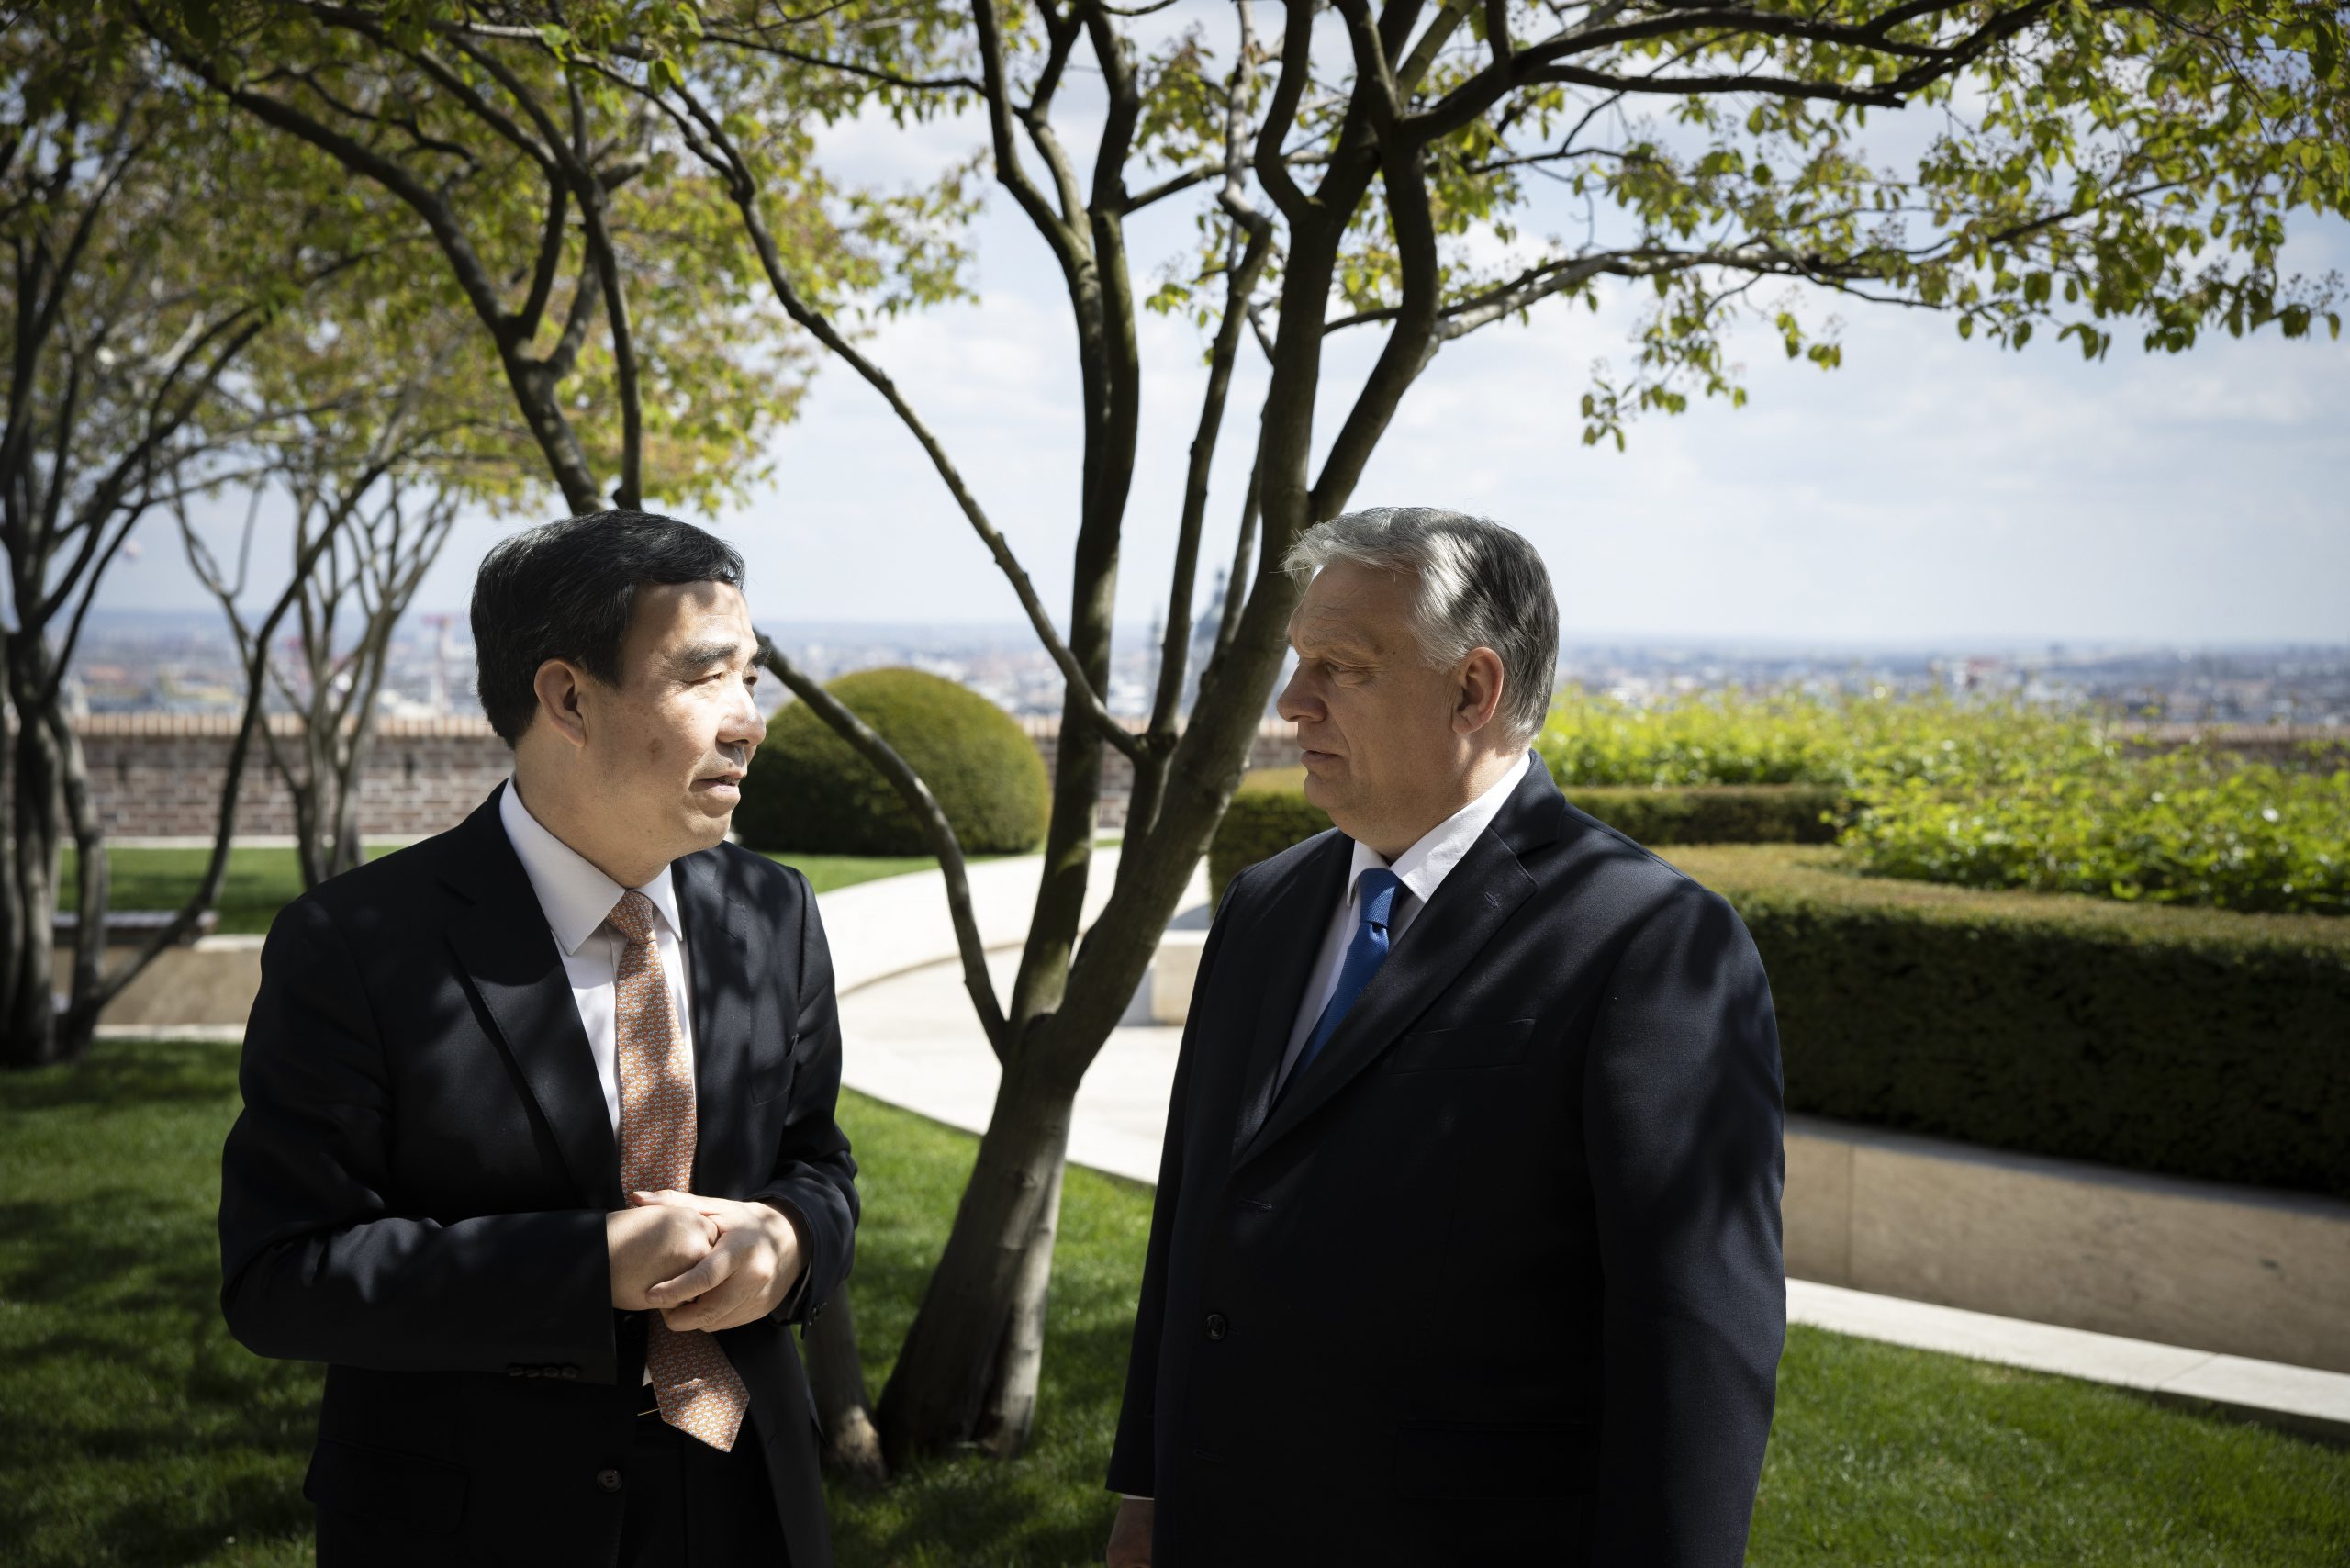 PM Orbán Meets Chairman of China Construction Bank